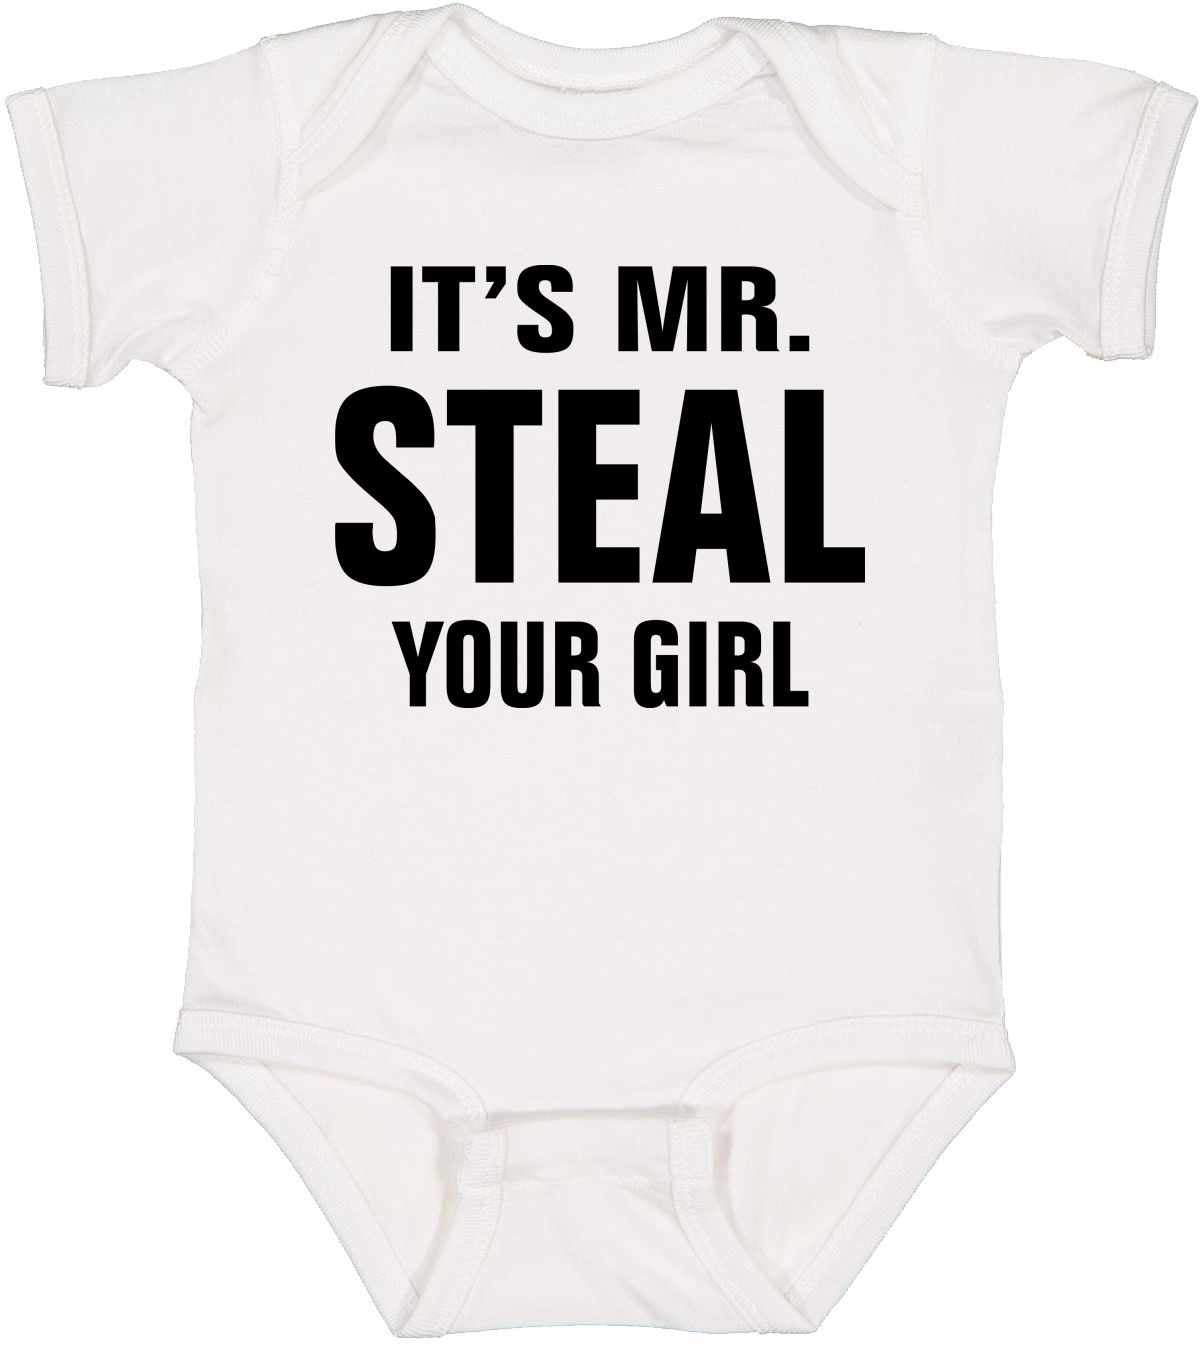 IT'S MR. STEAL YOUR GIRL on Infant BodySuit (#906-10)